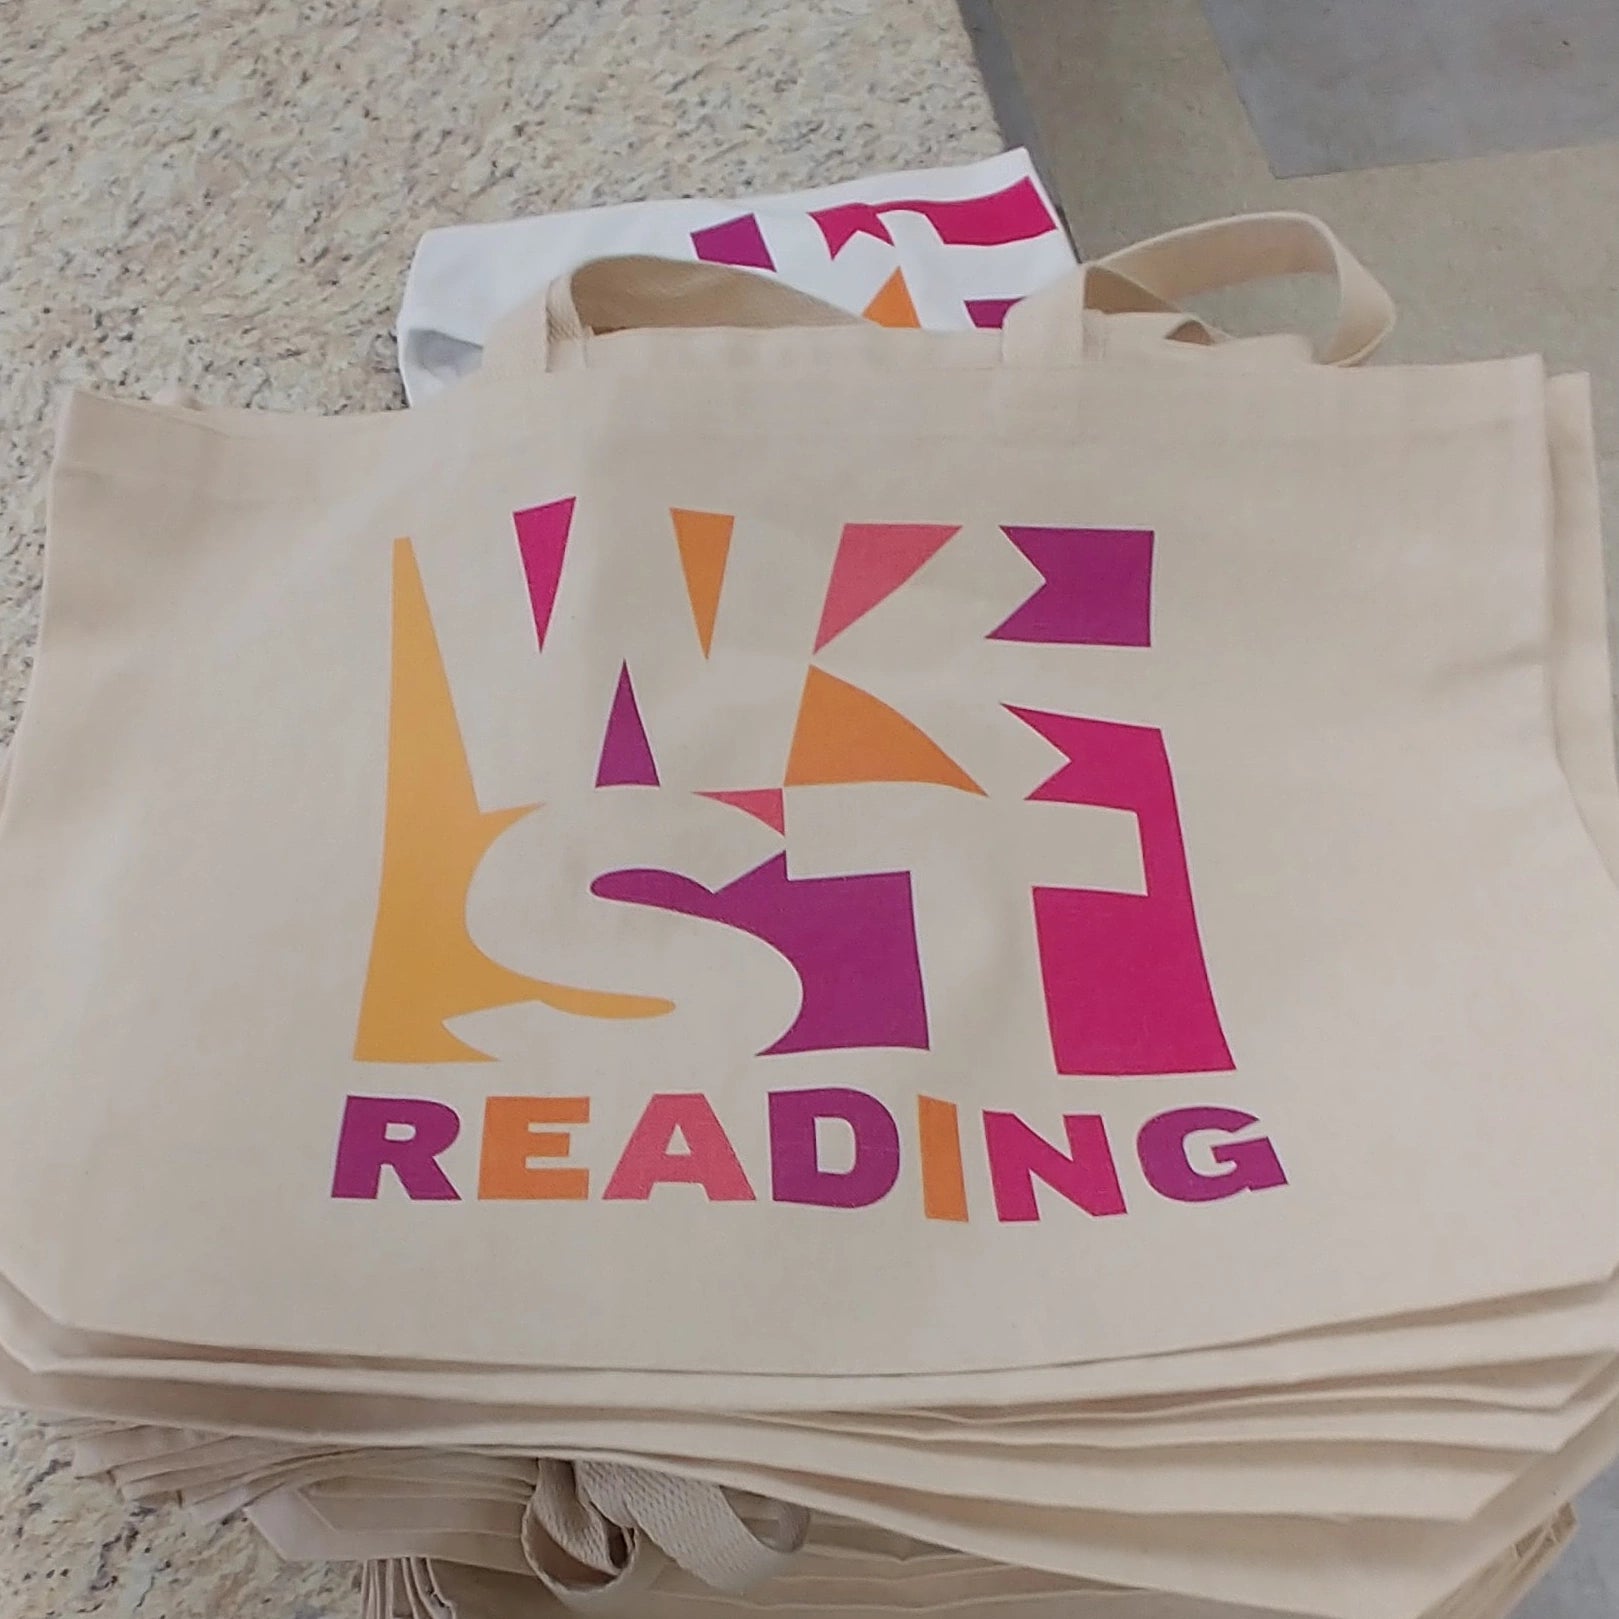 Tote Bags made for West Reading Sidewalk Sale